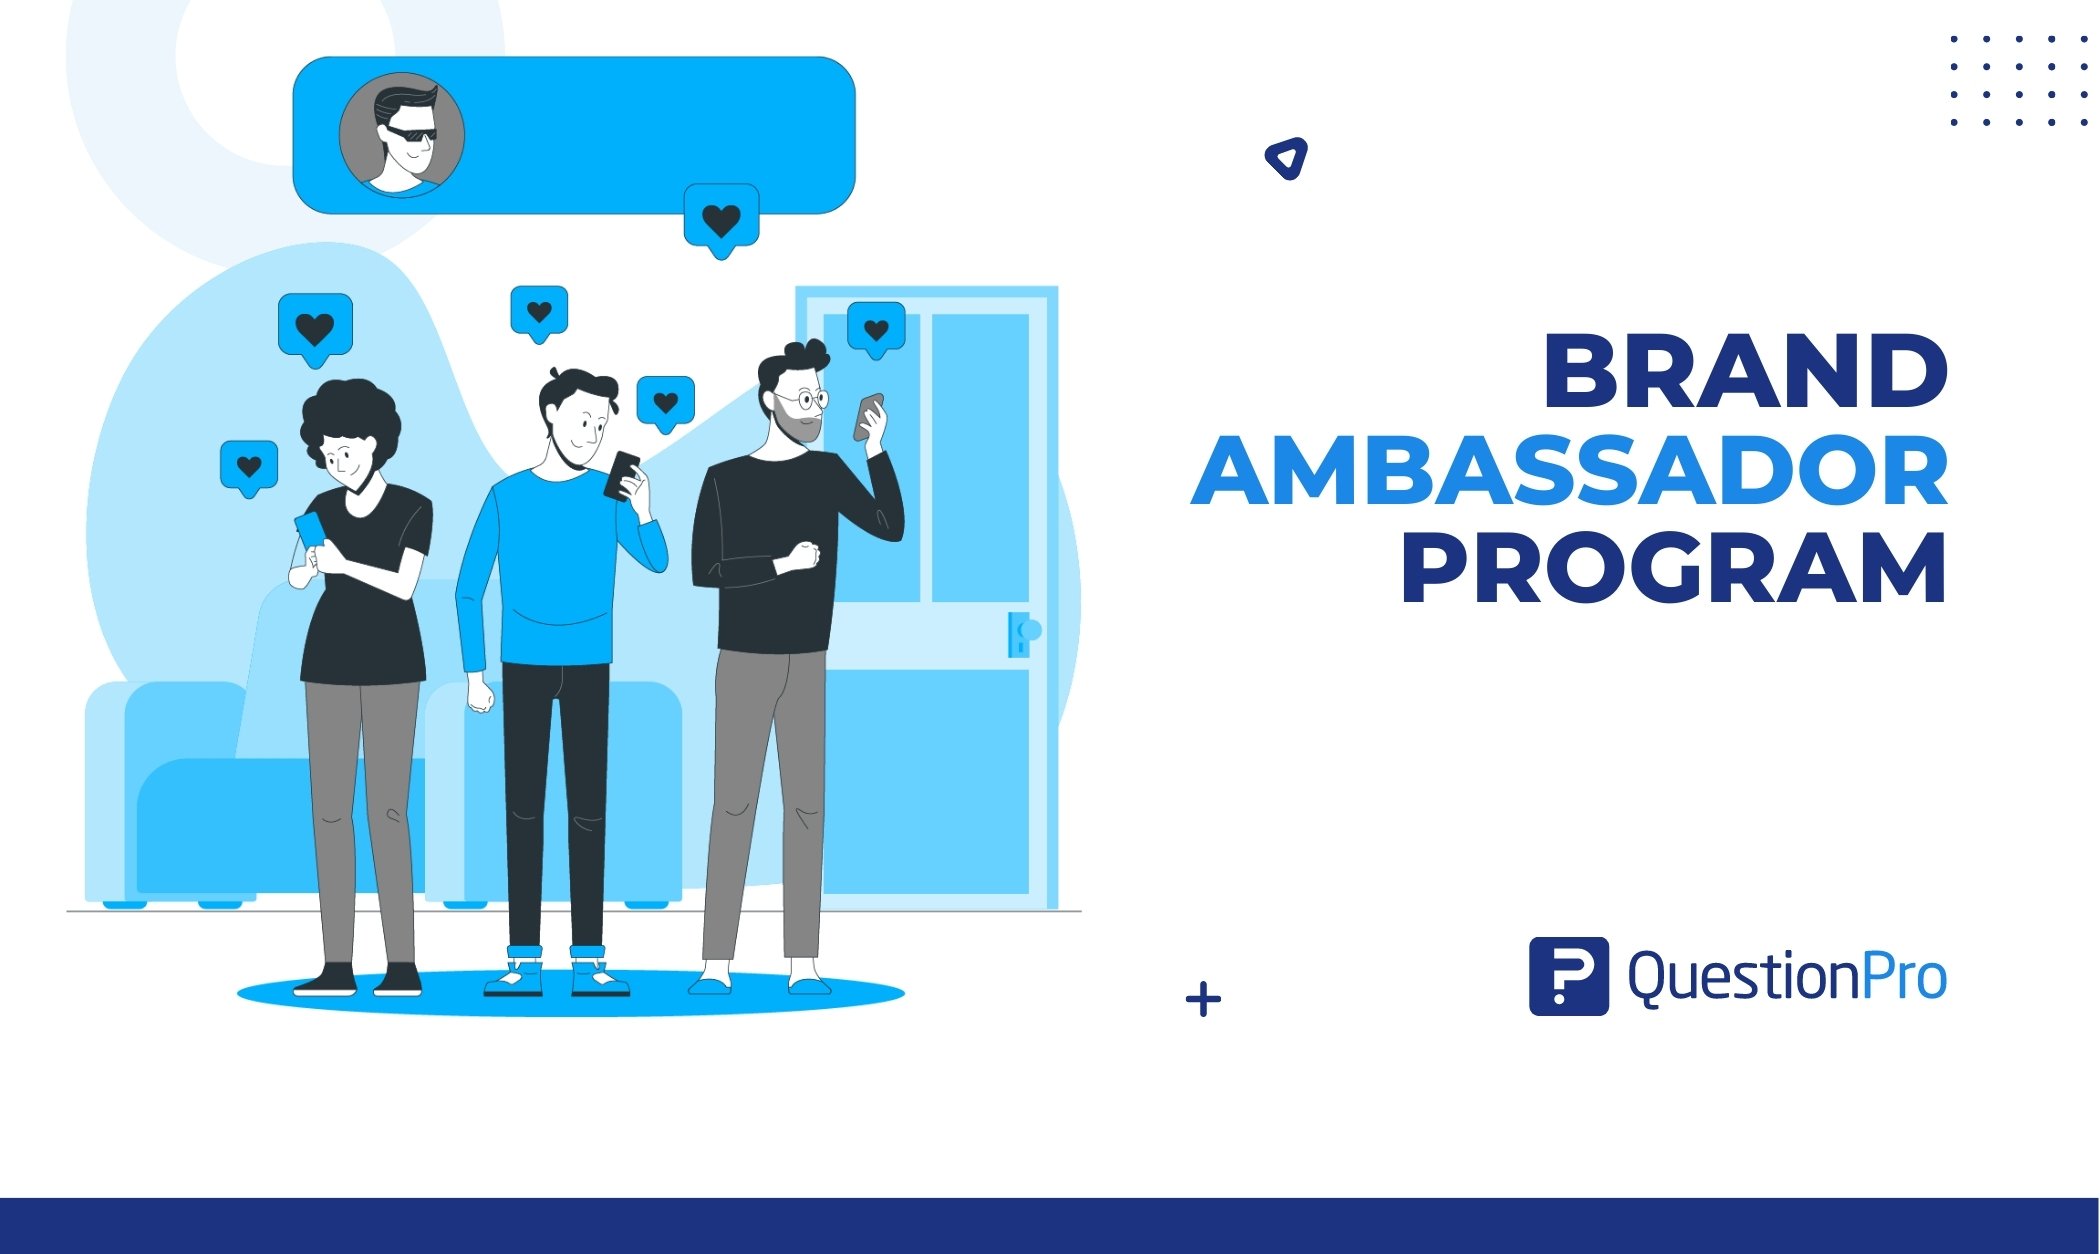 A brand ambassador program is a marketing strategy in which an individual becomes a representative of a company, promoting its brand.